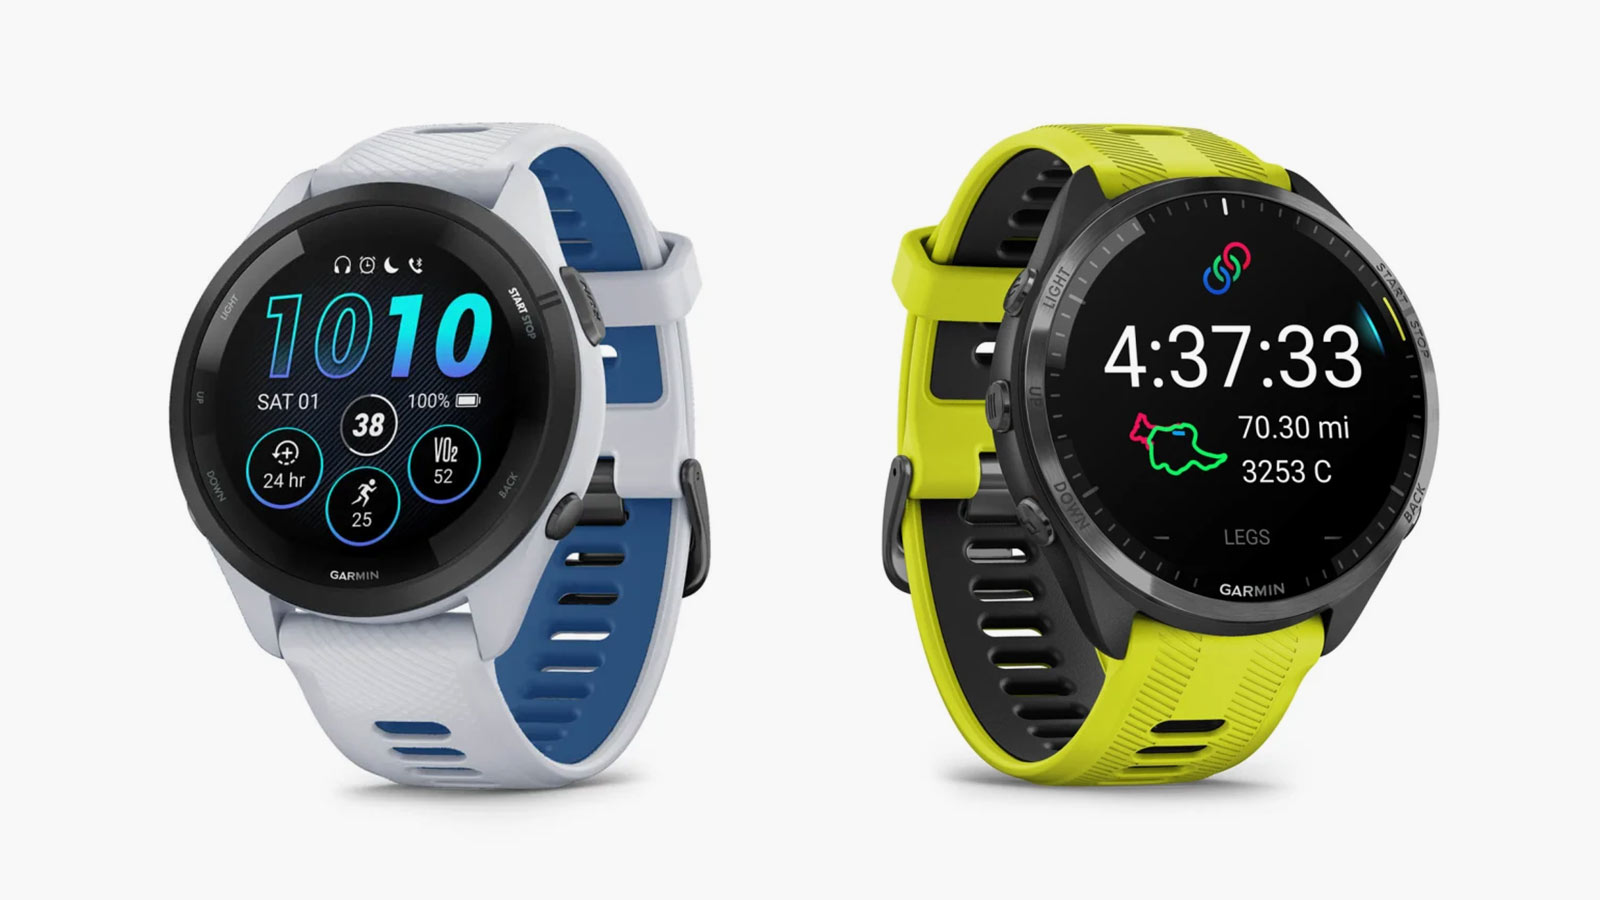 Garmin's Forerunner 265 and 965 are bright additions to the lineup